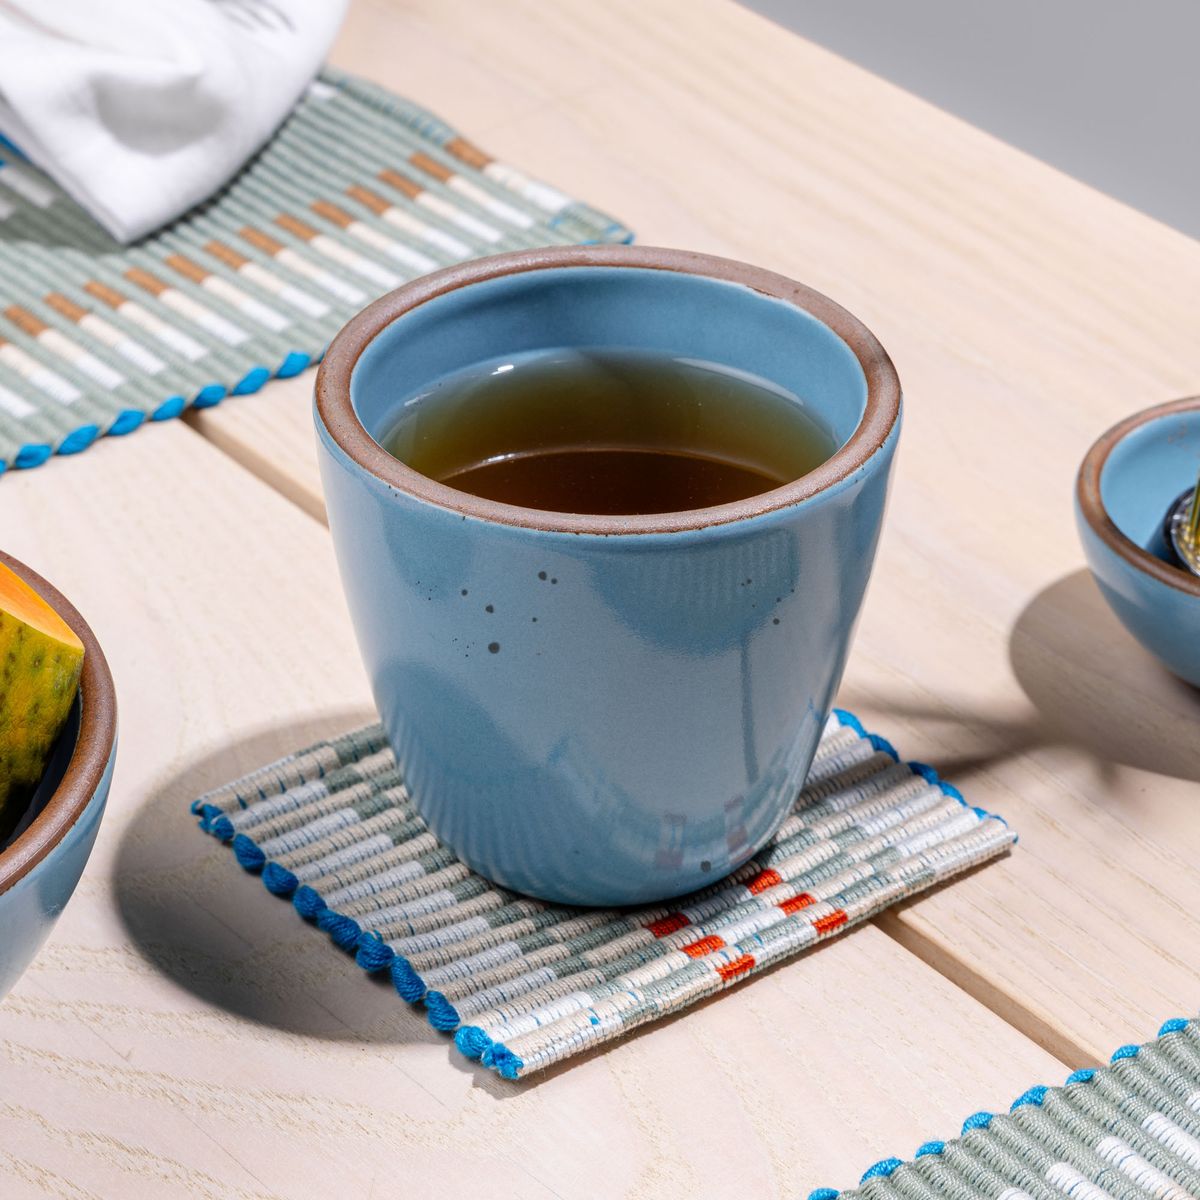 A short cup that tapers out to get wider at the top in a robin's egg blue color featuring iron speckles, sits on a woven coaster on a table.